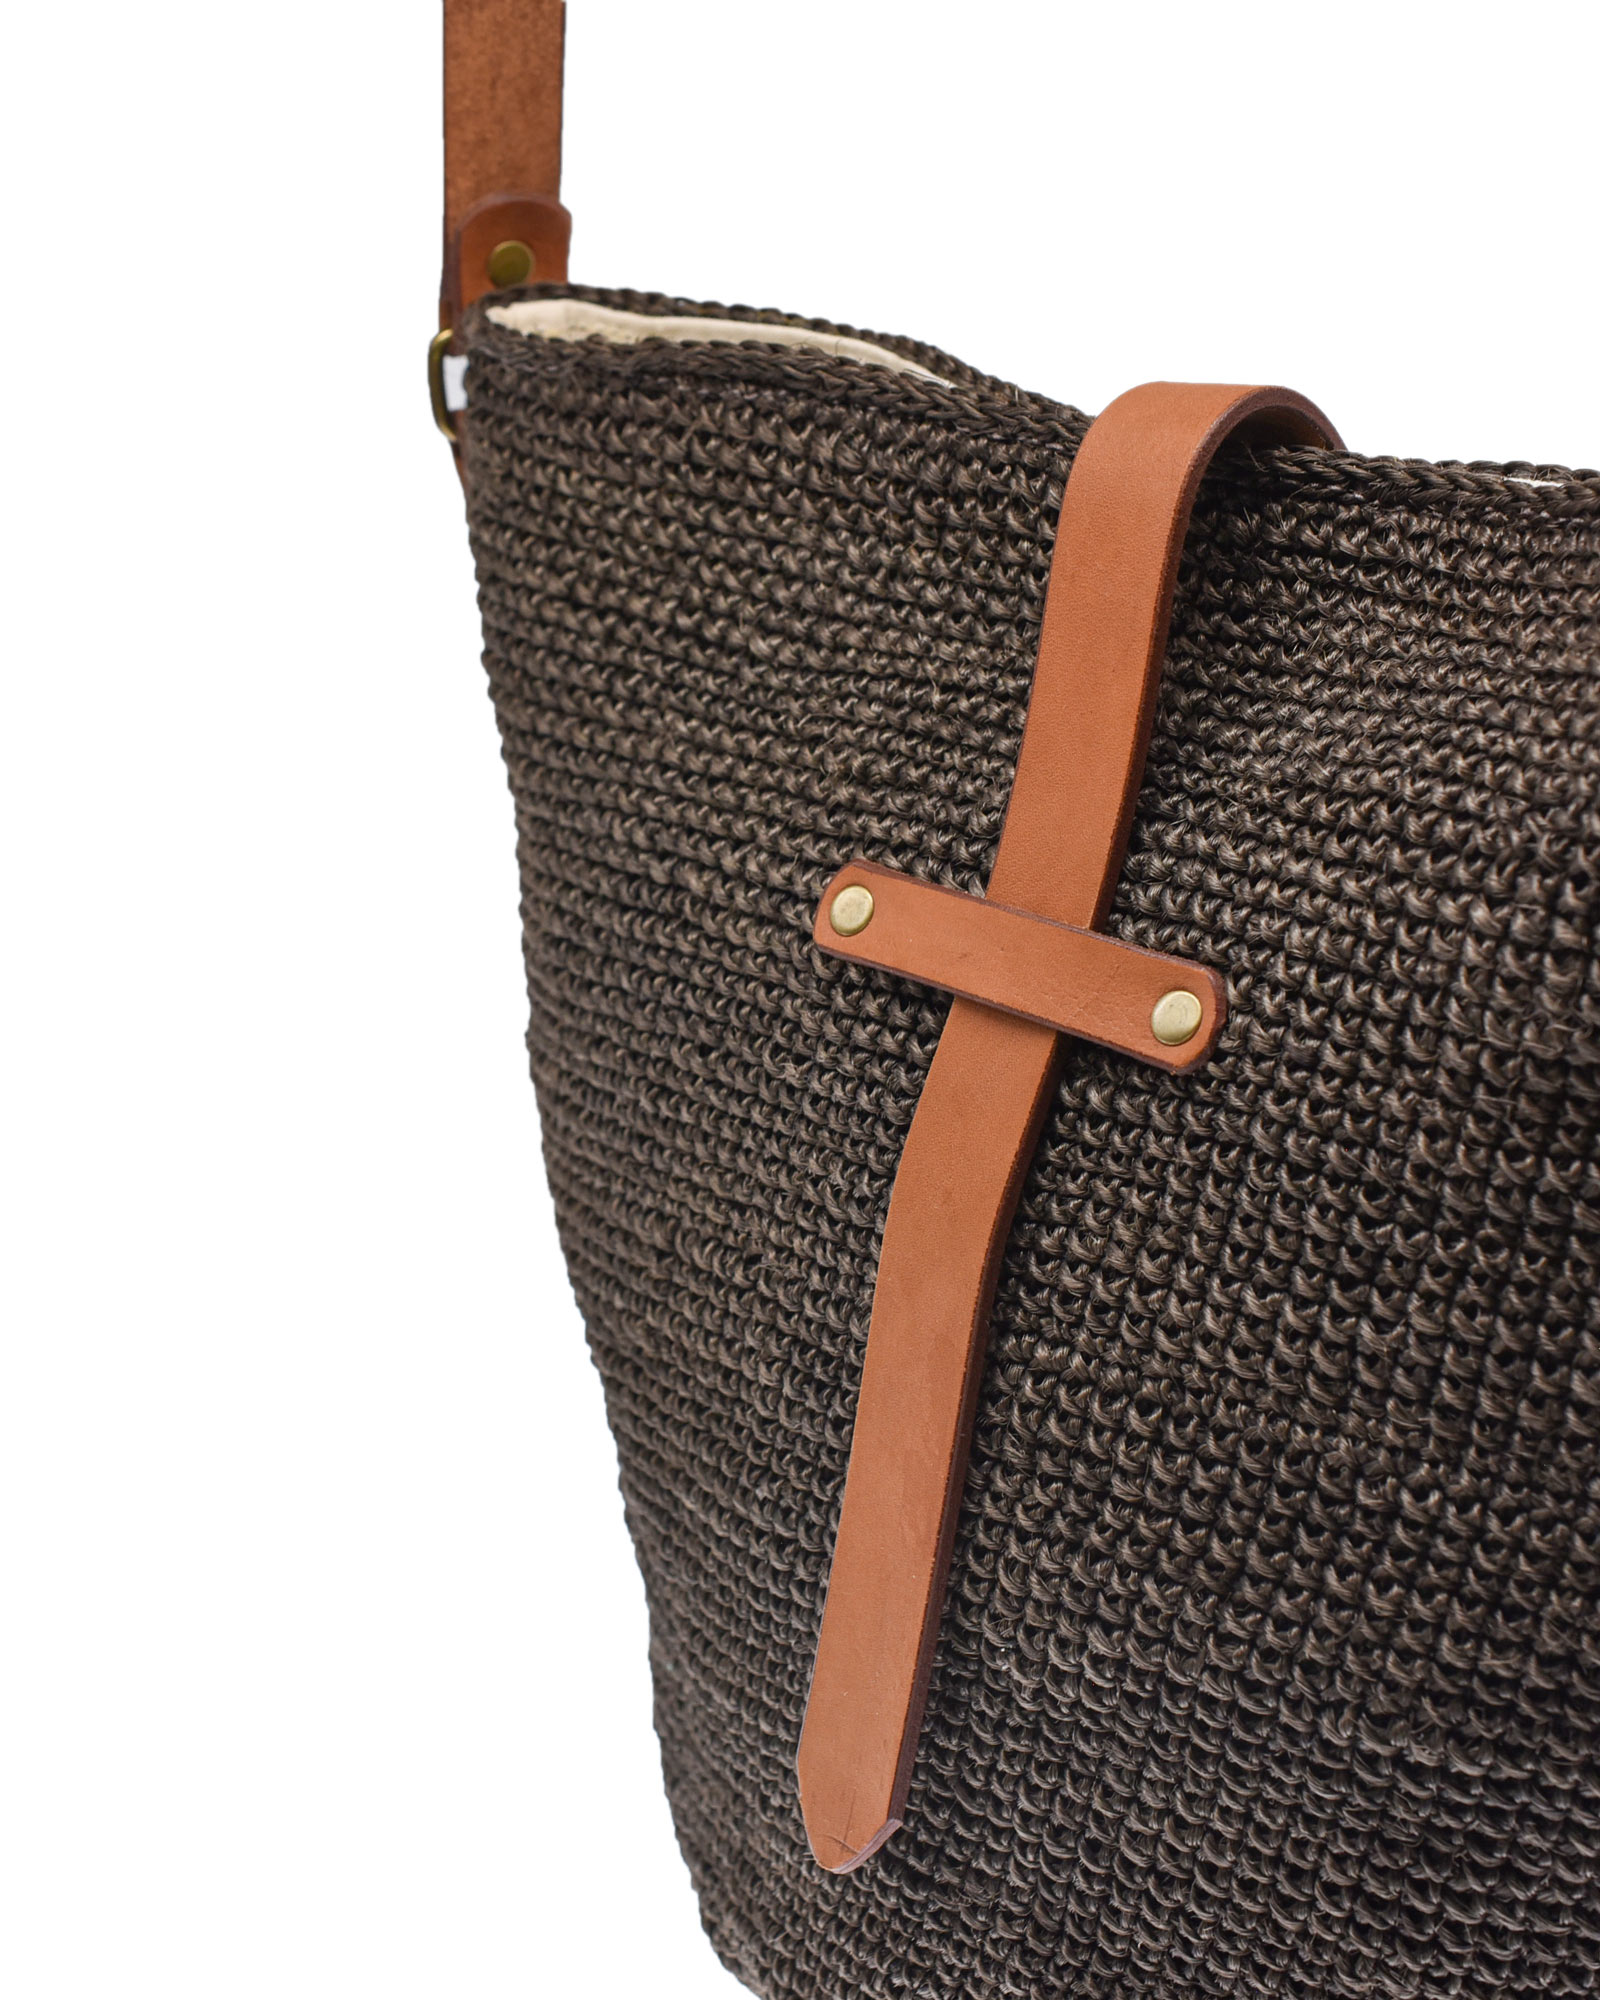 Tan Woven Bag Natural Leather Woven Sling Bag Leather Sling 